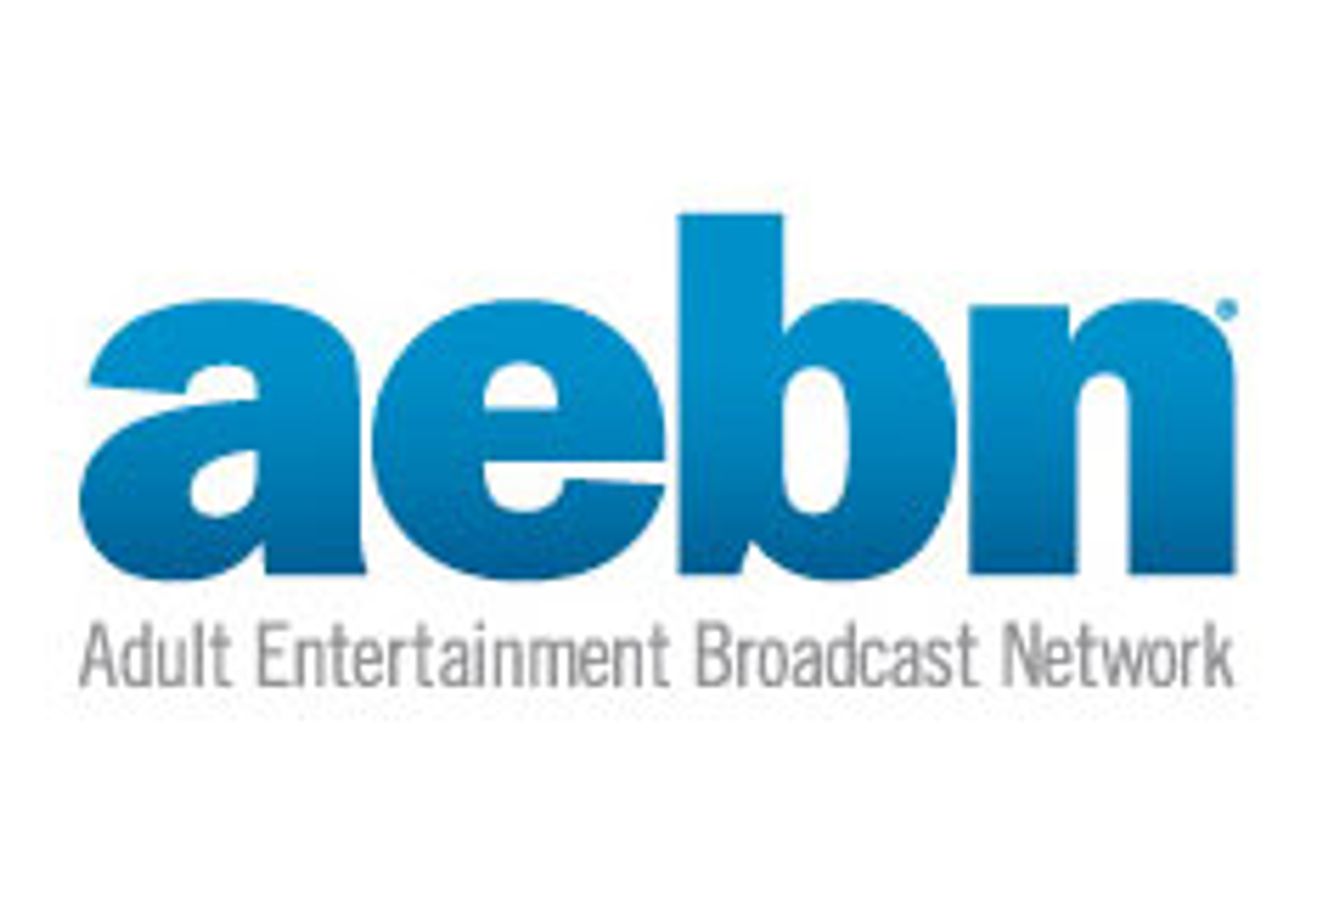 Adult Entertainment Broadcast Network (AEBN)